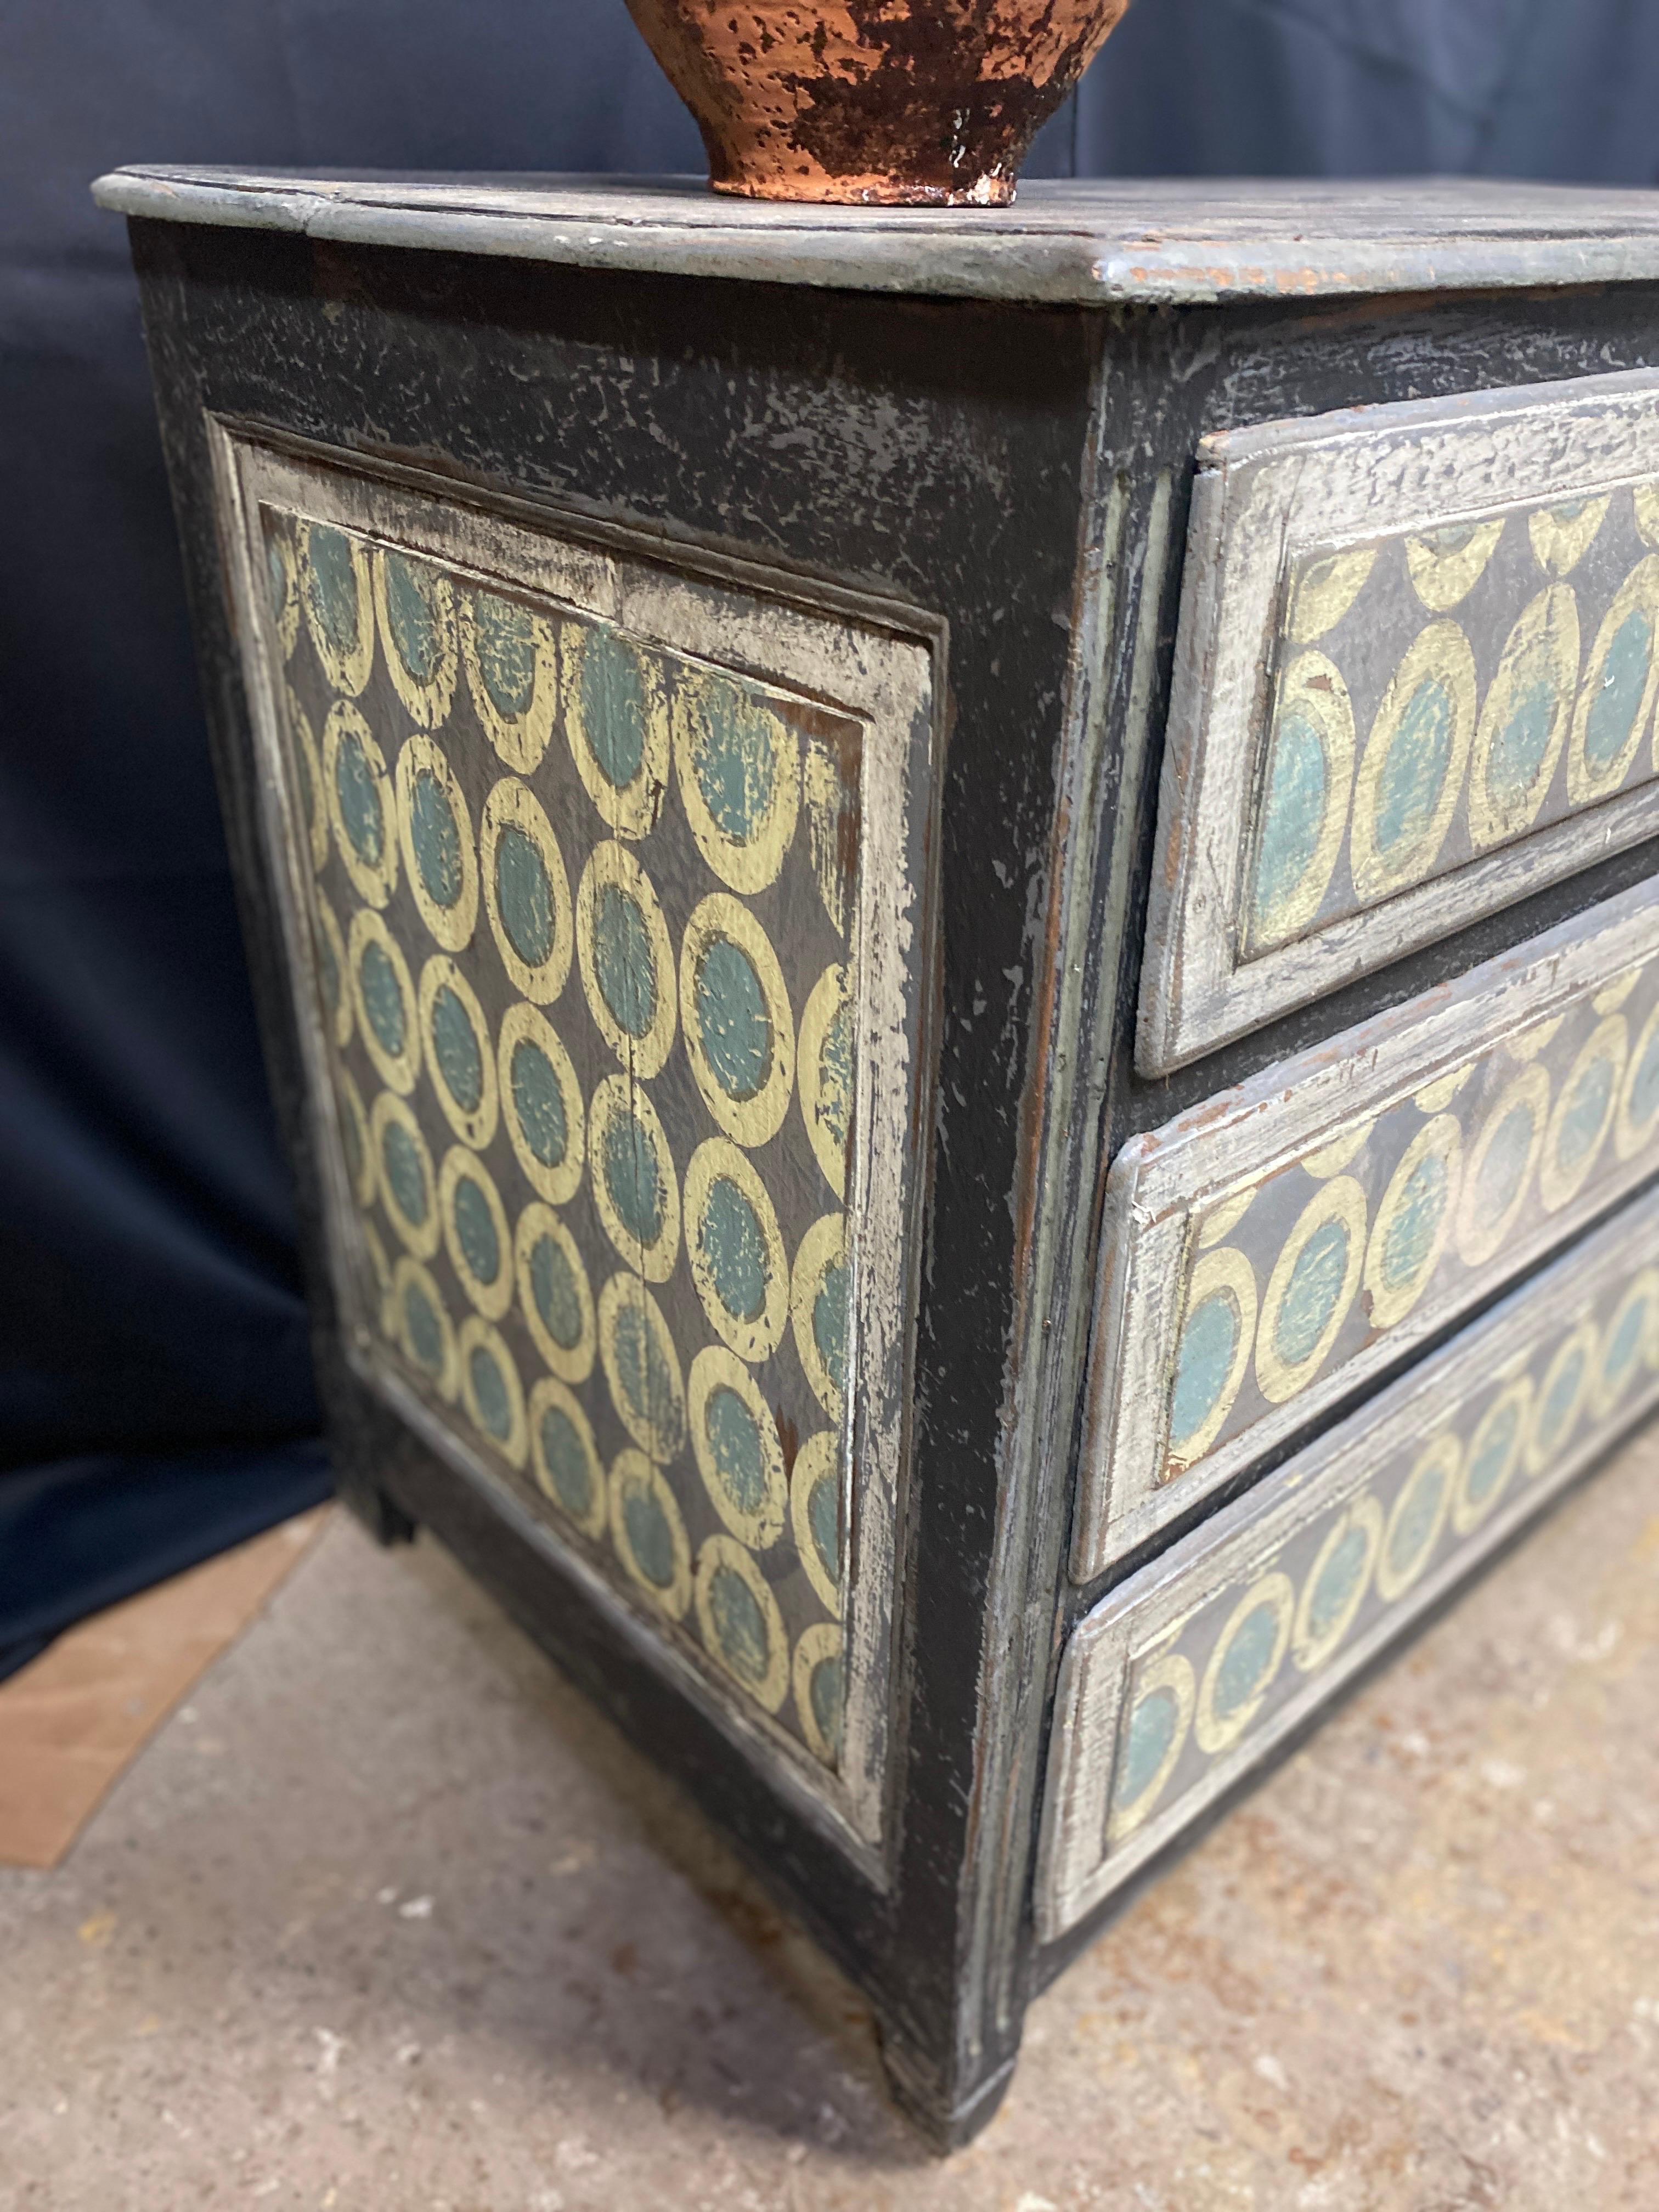 Louis XVI Louis xvi chest of drawers 3 patina drawers with different shapes and colors For Sale